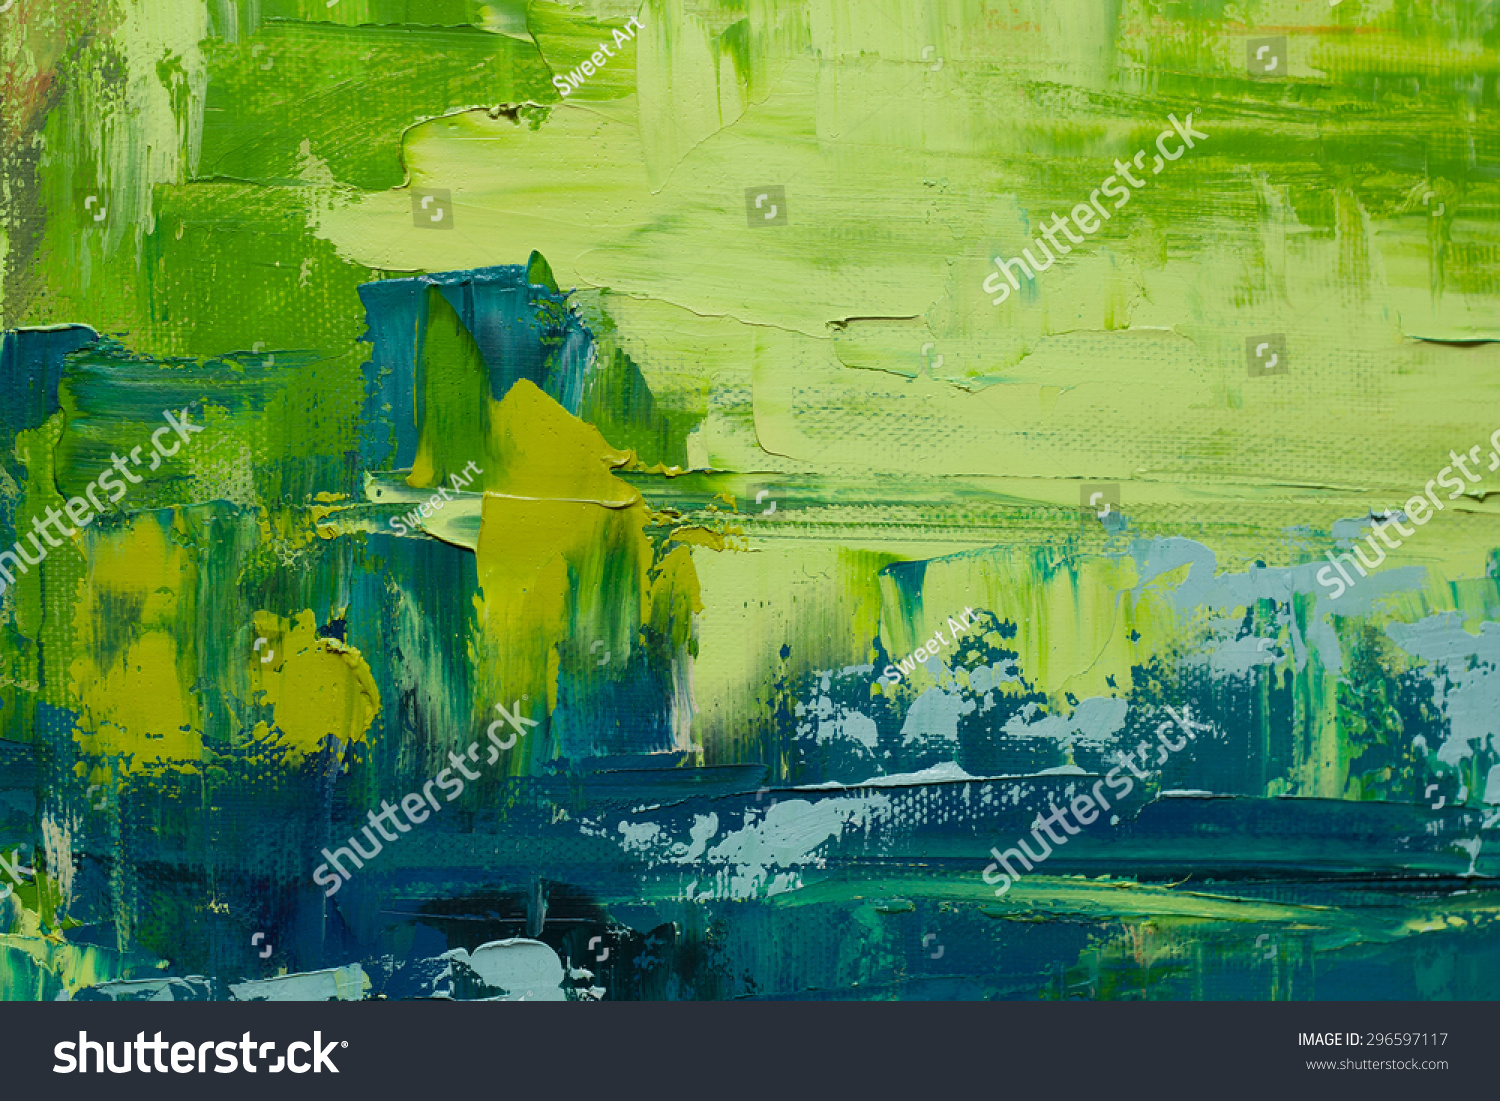 Abstract Art Background. Oil Painting On Canvas. Green And Yellow ...